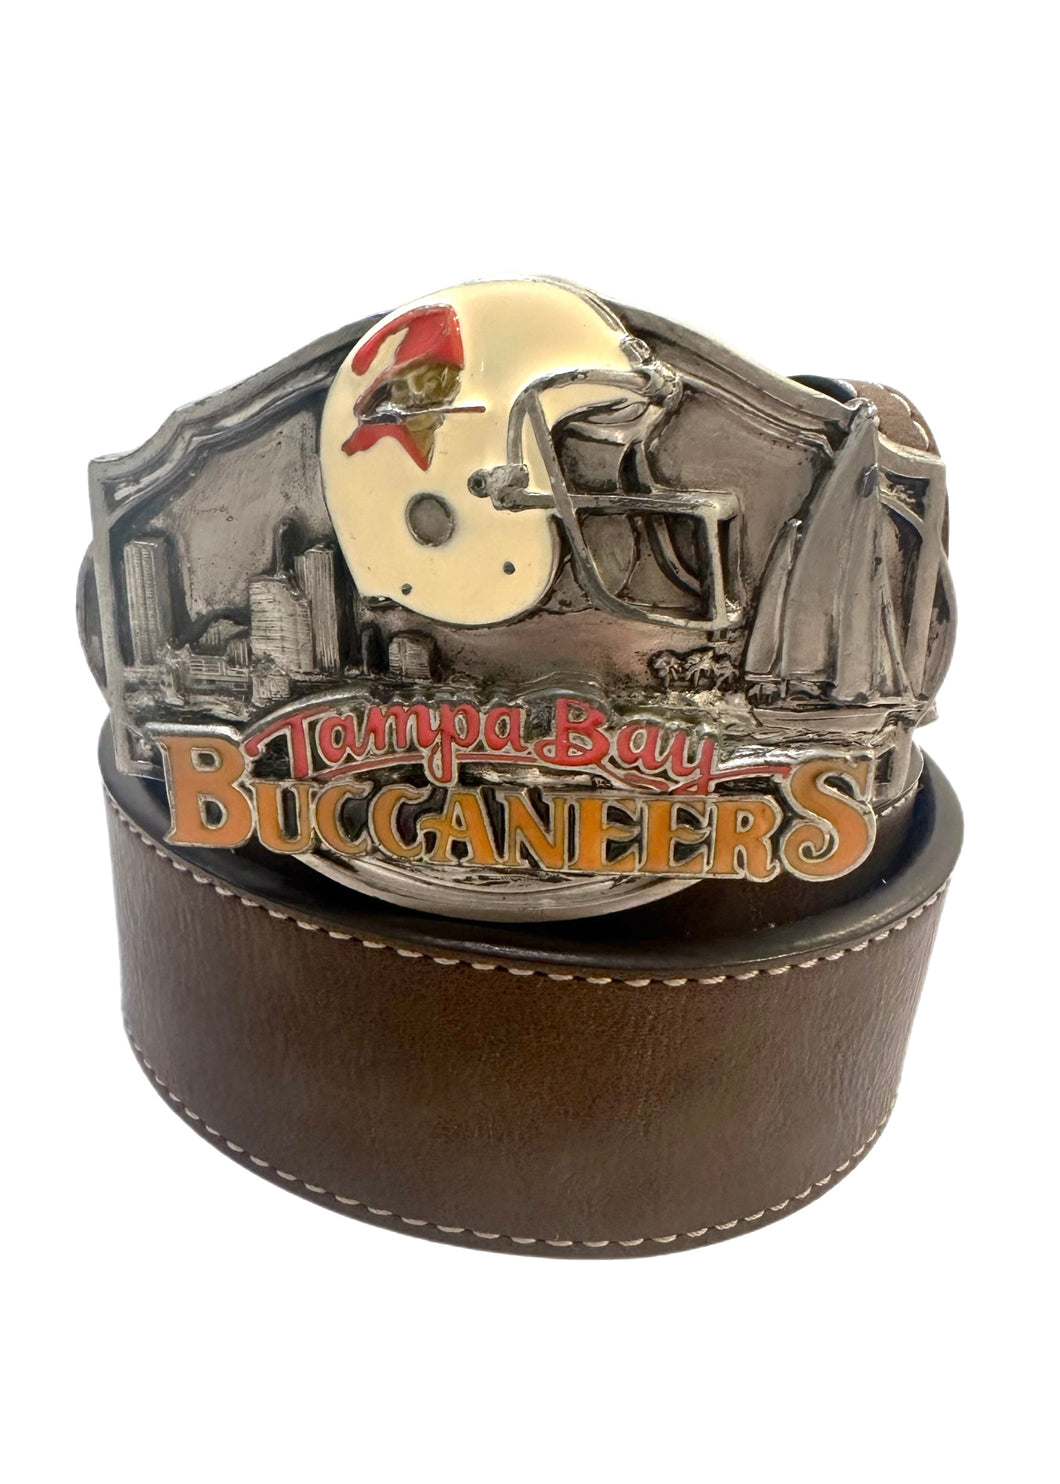 Tampa Bay Buccaneers, Football Vintage 1997 Belt Buckle with New Soft Leather Strap